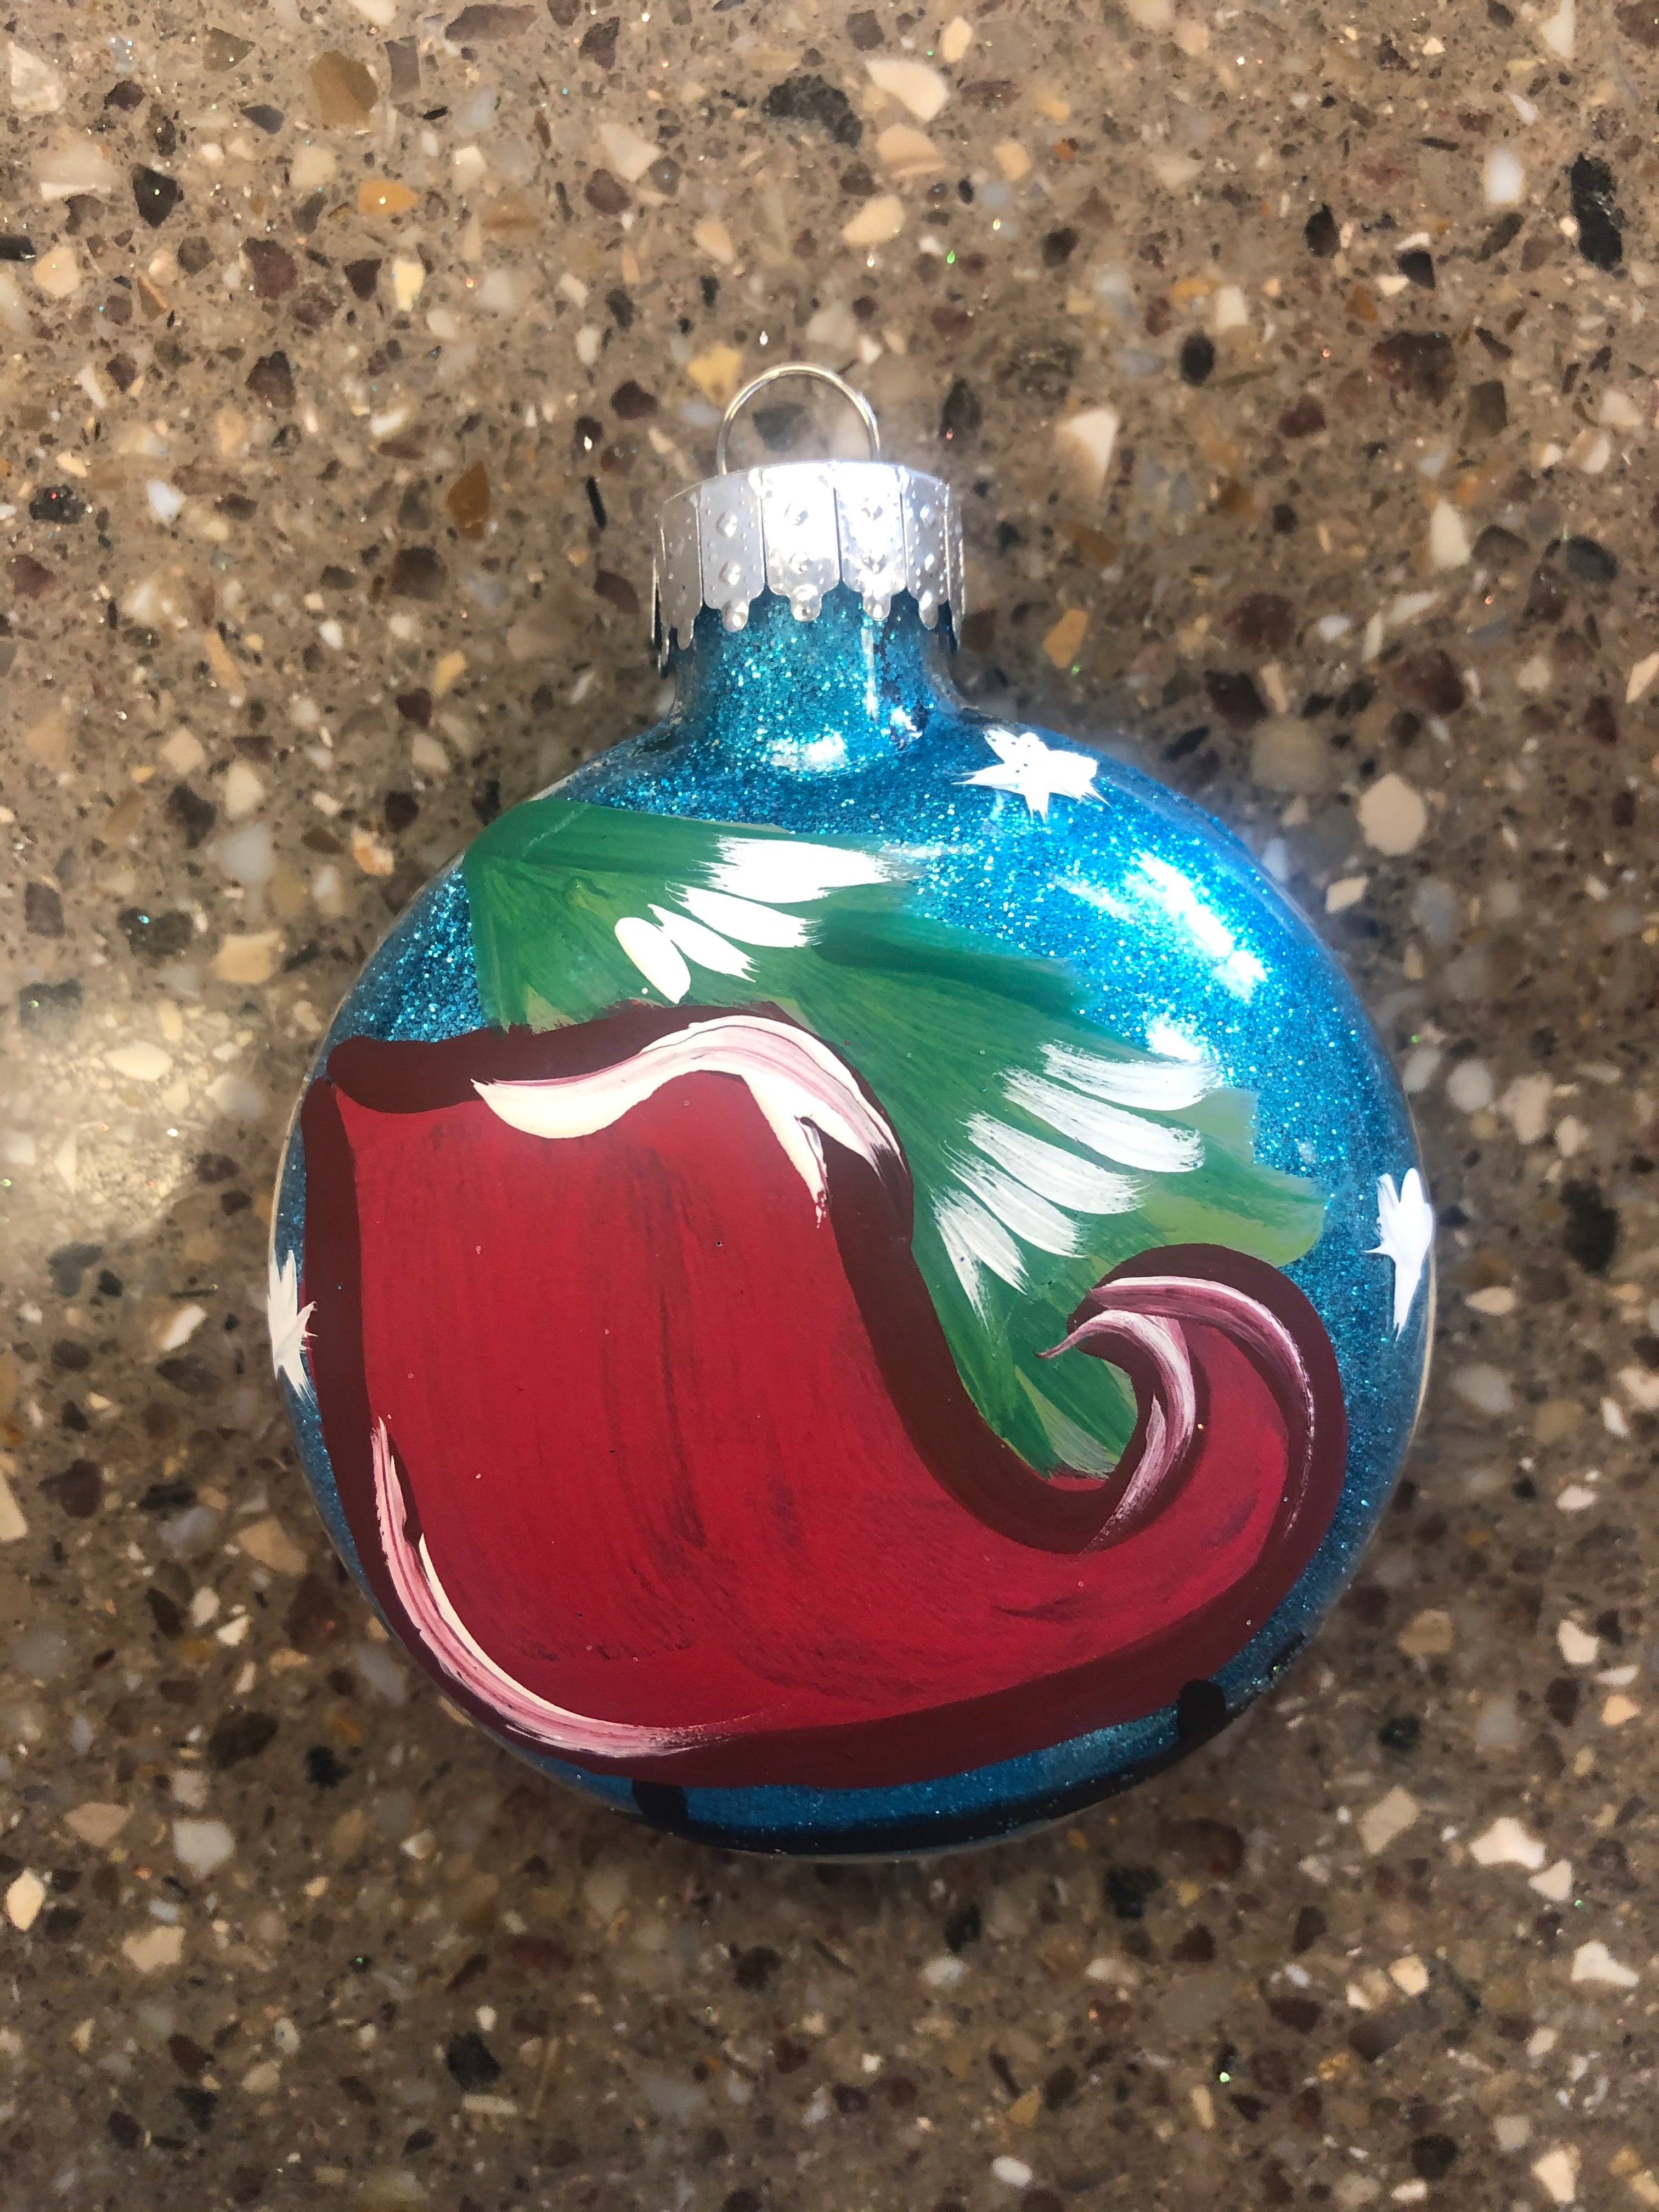 Hand painted and glittered glass ornaments